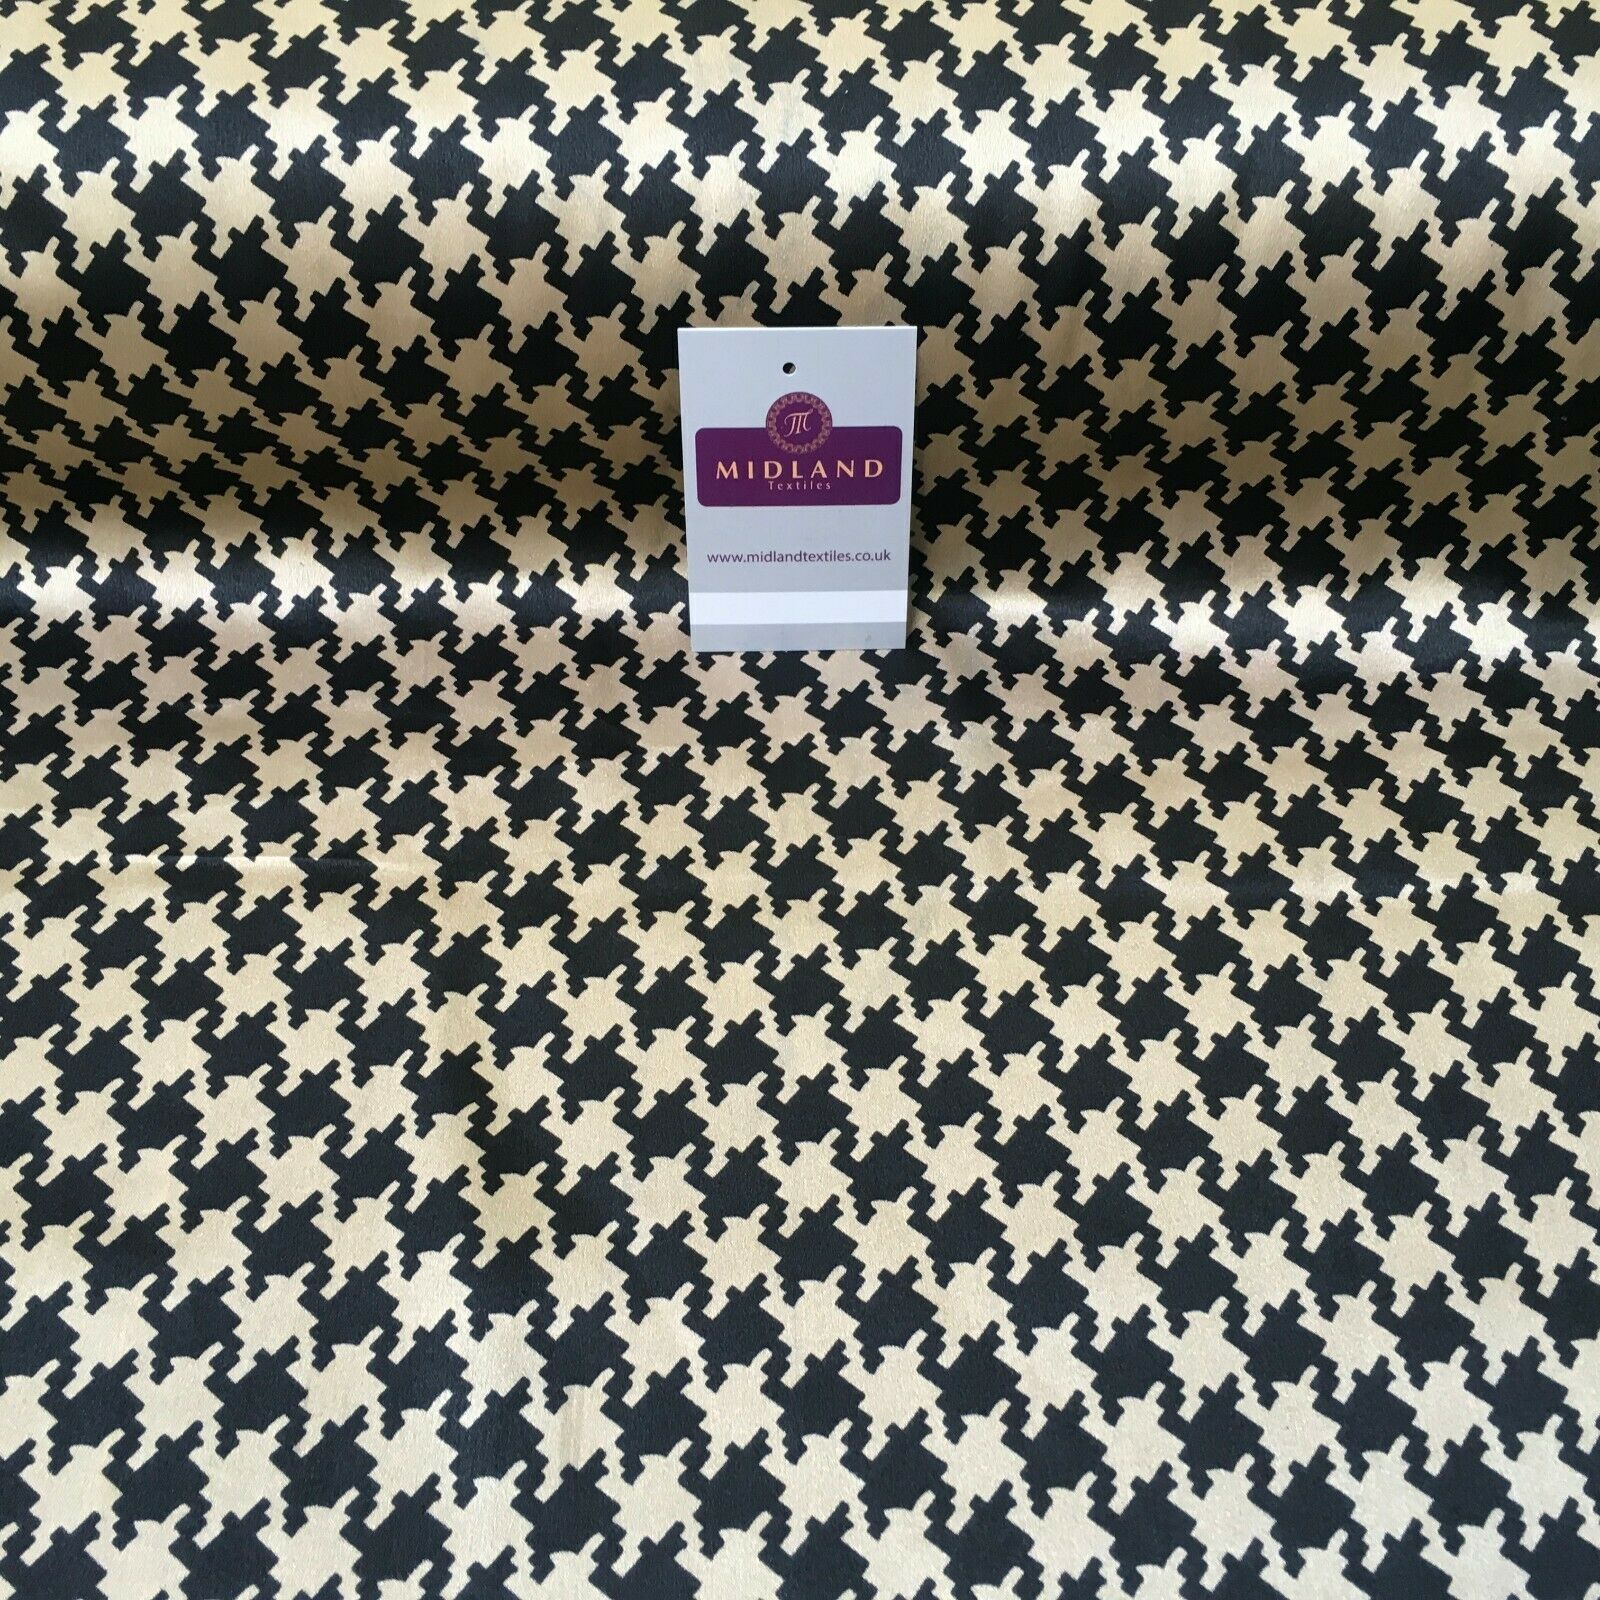 Black and Gold Dogtooth Printed Silky Satin Dress Fabric 150cm Wide MR1044-1